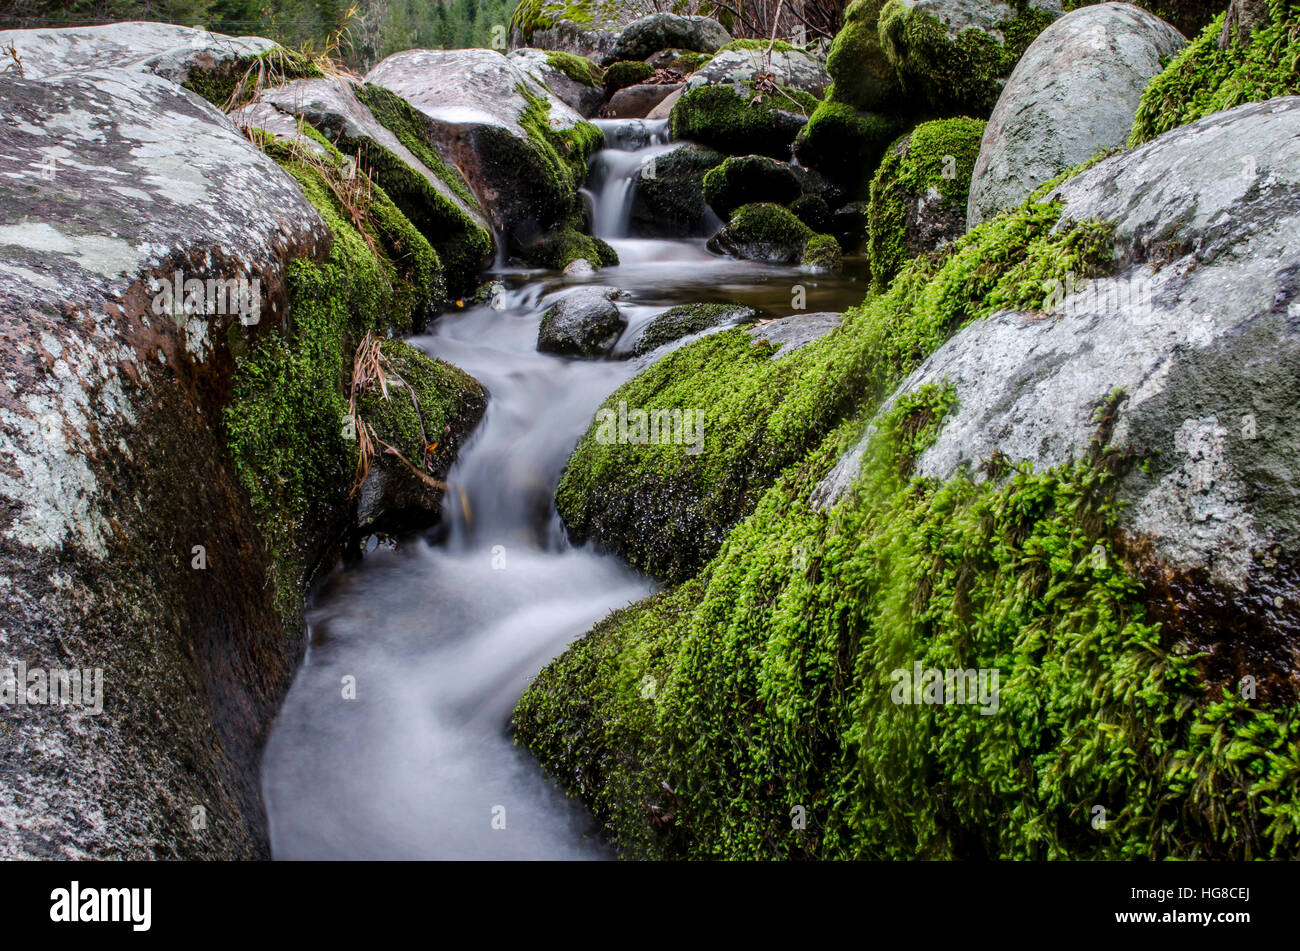 Stream flowing through moss covered rocks in forest Stock Photo